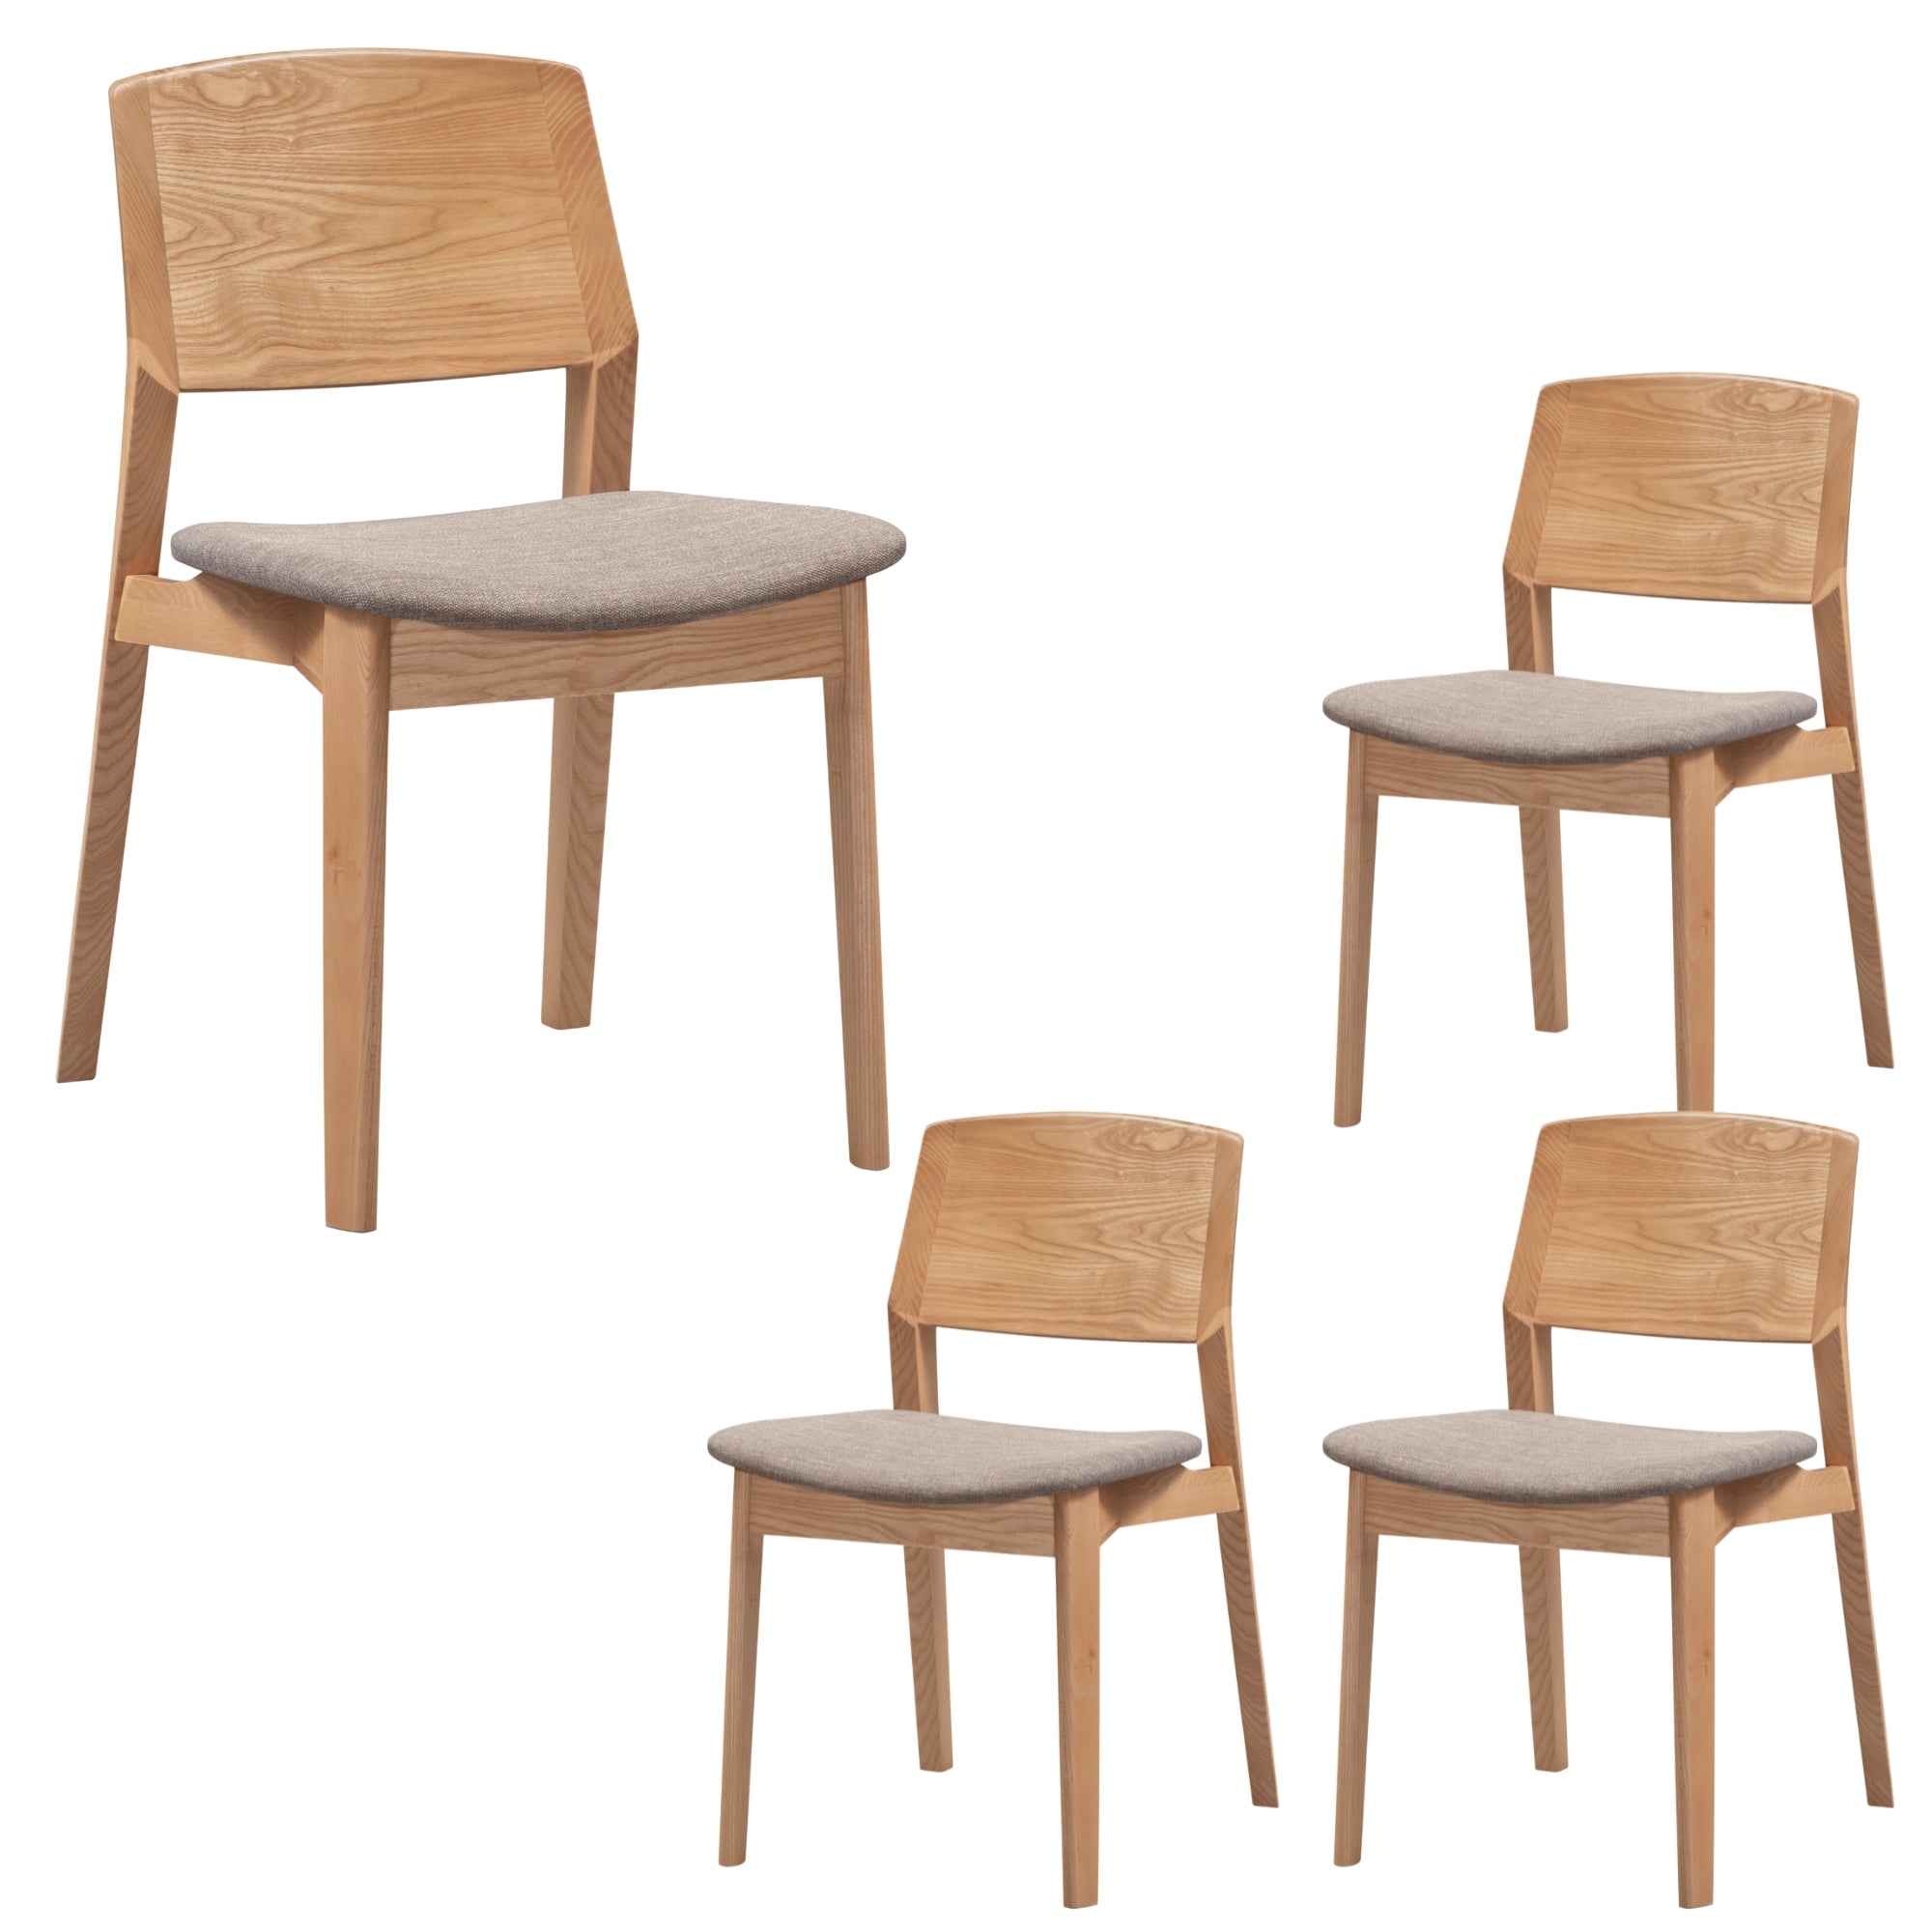 4pc Solid Ash Wood Dining Chairs, Grey Fabric, Oak Frame